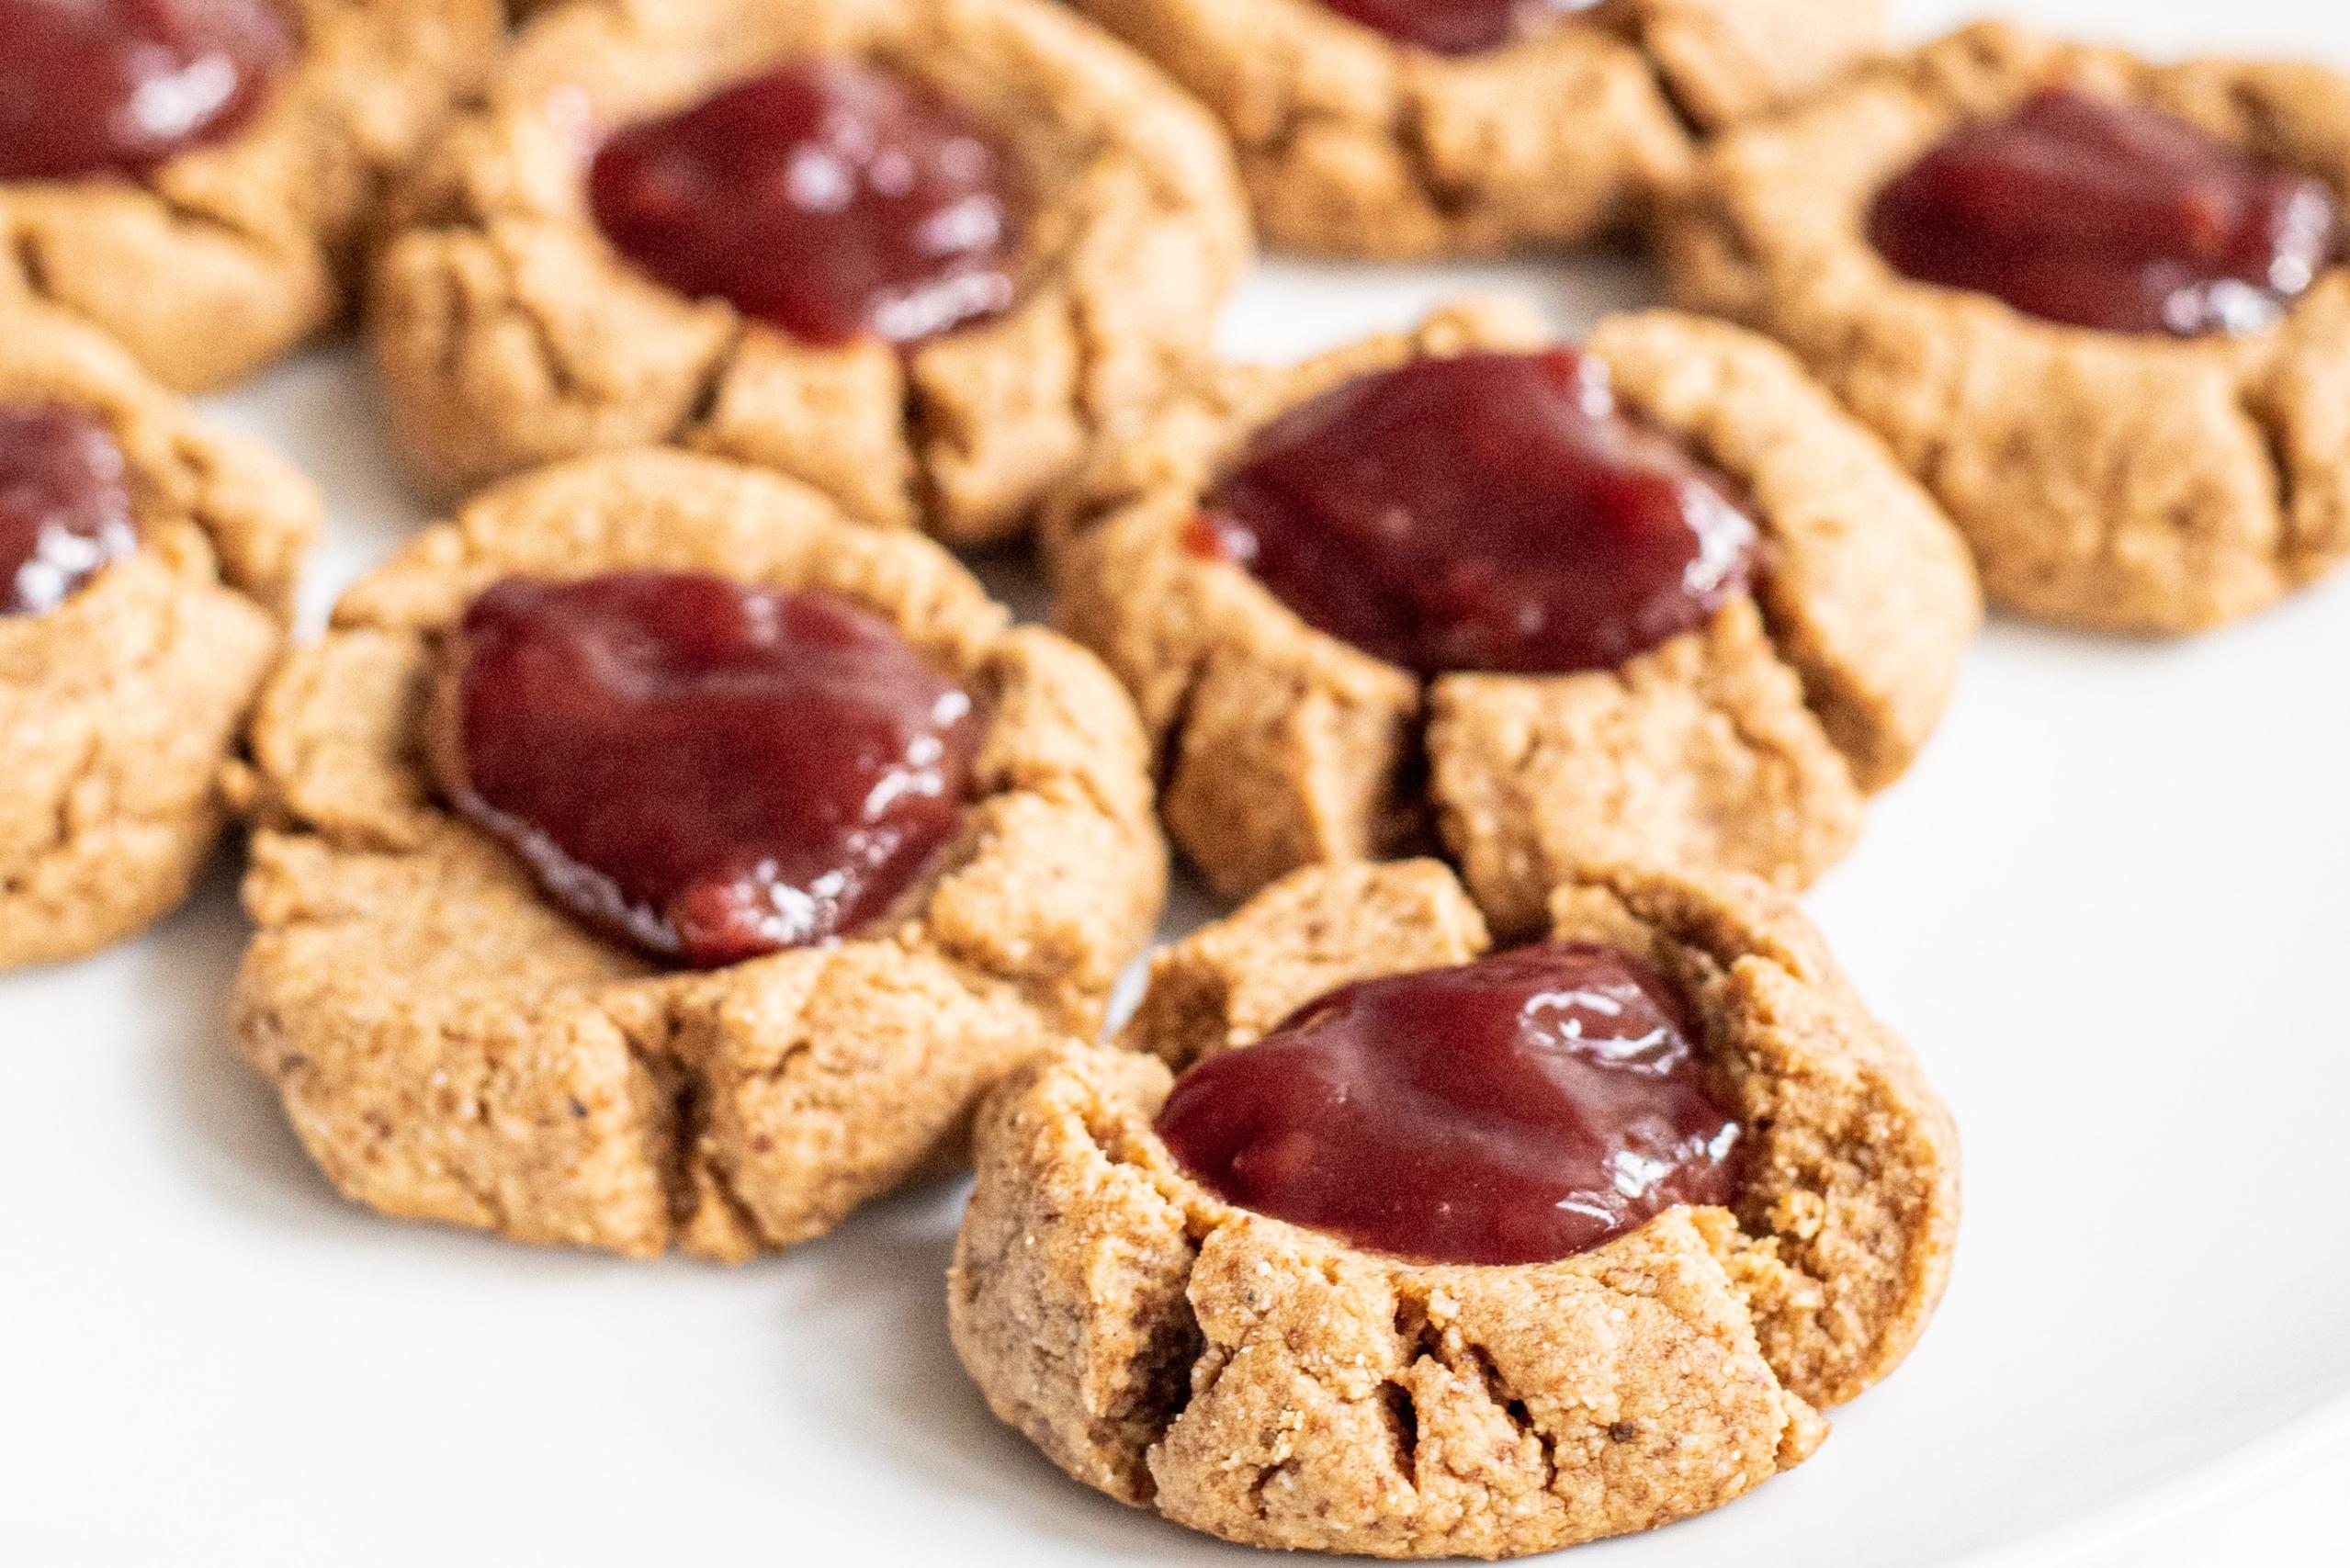  Who says you can't have PB&J for dessert? These cookies will make you believe otherwise.